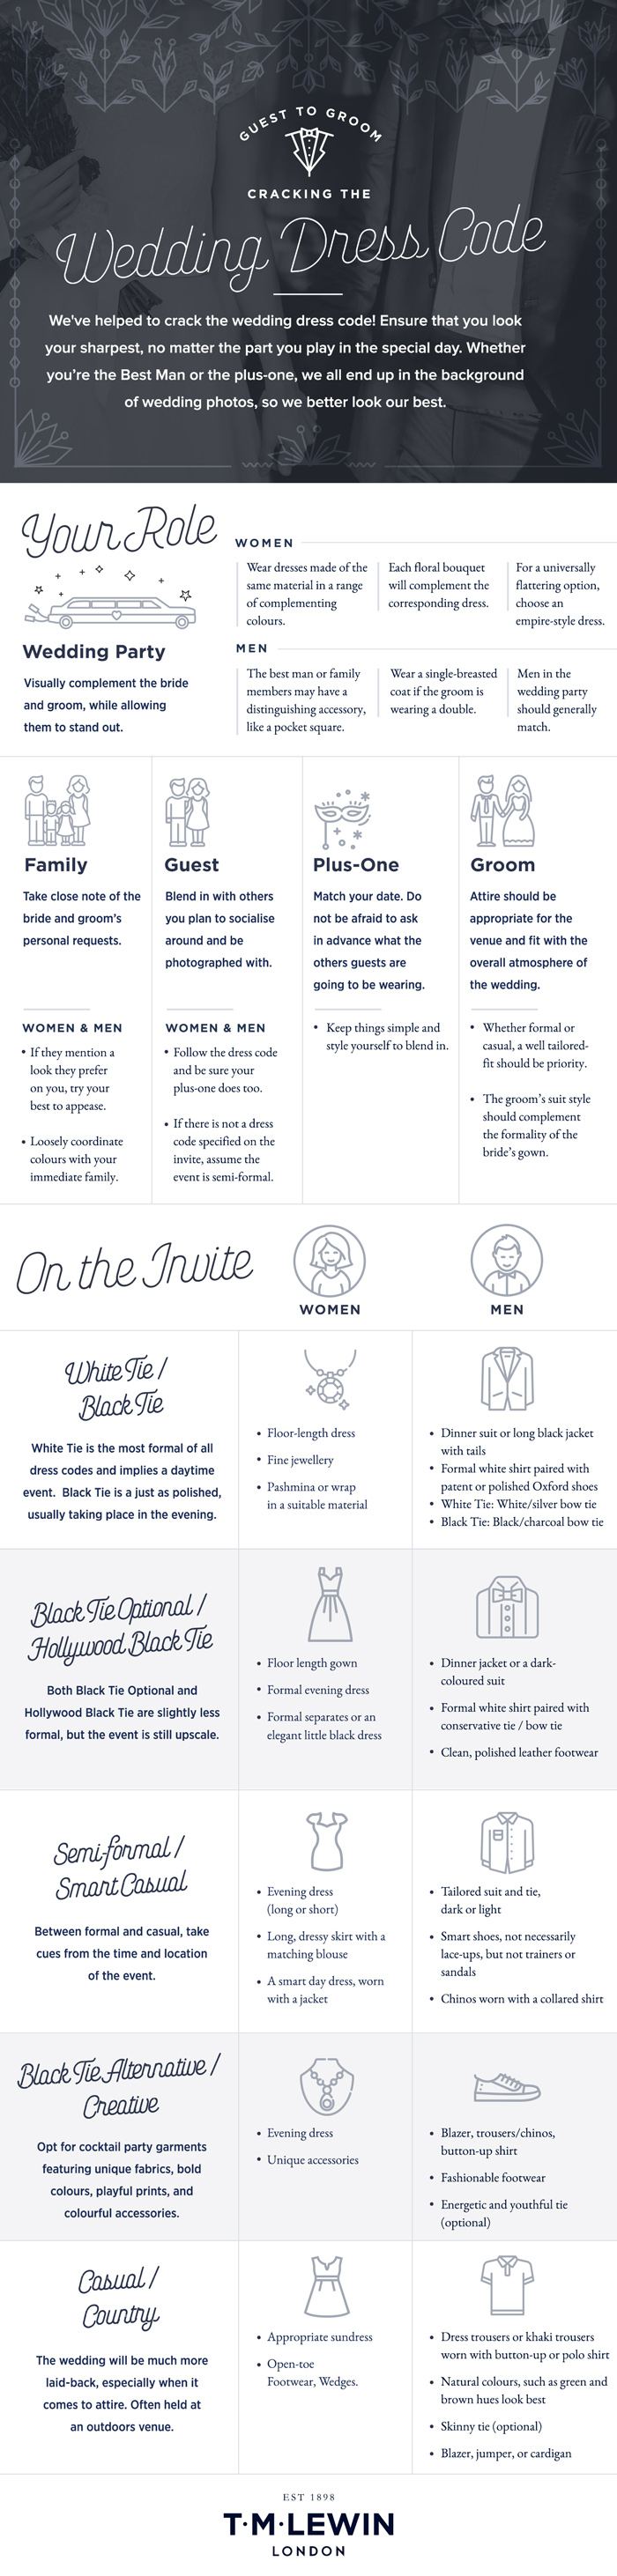 Wedding Guest Guidelines: Navigating What to Wear & When [Infographic]